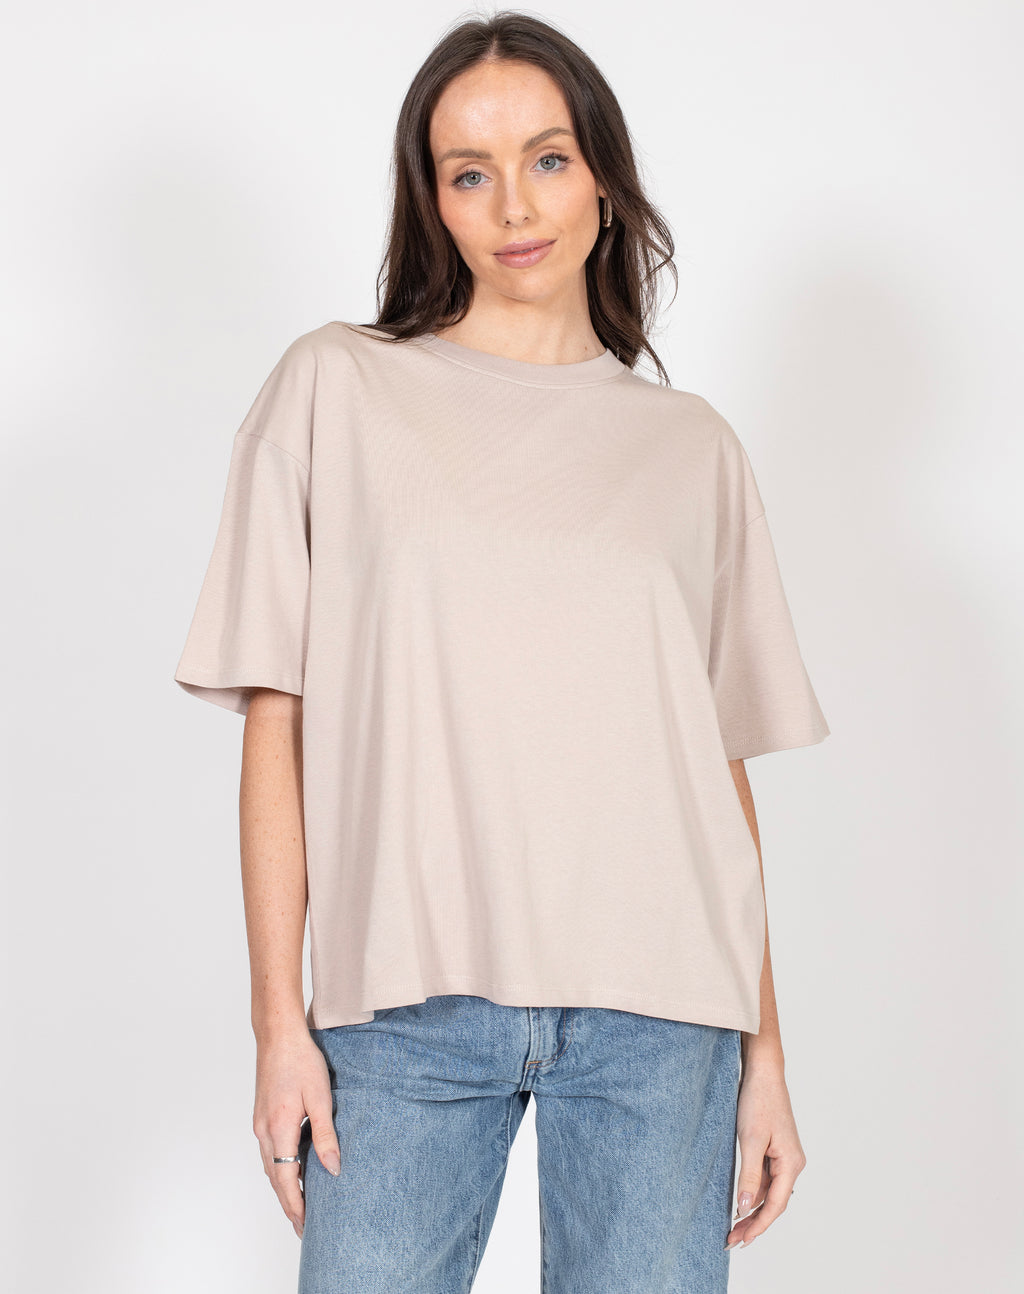 Brunette The Label - Boxy Tee